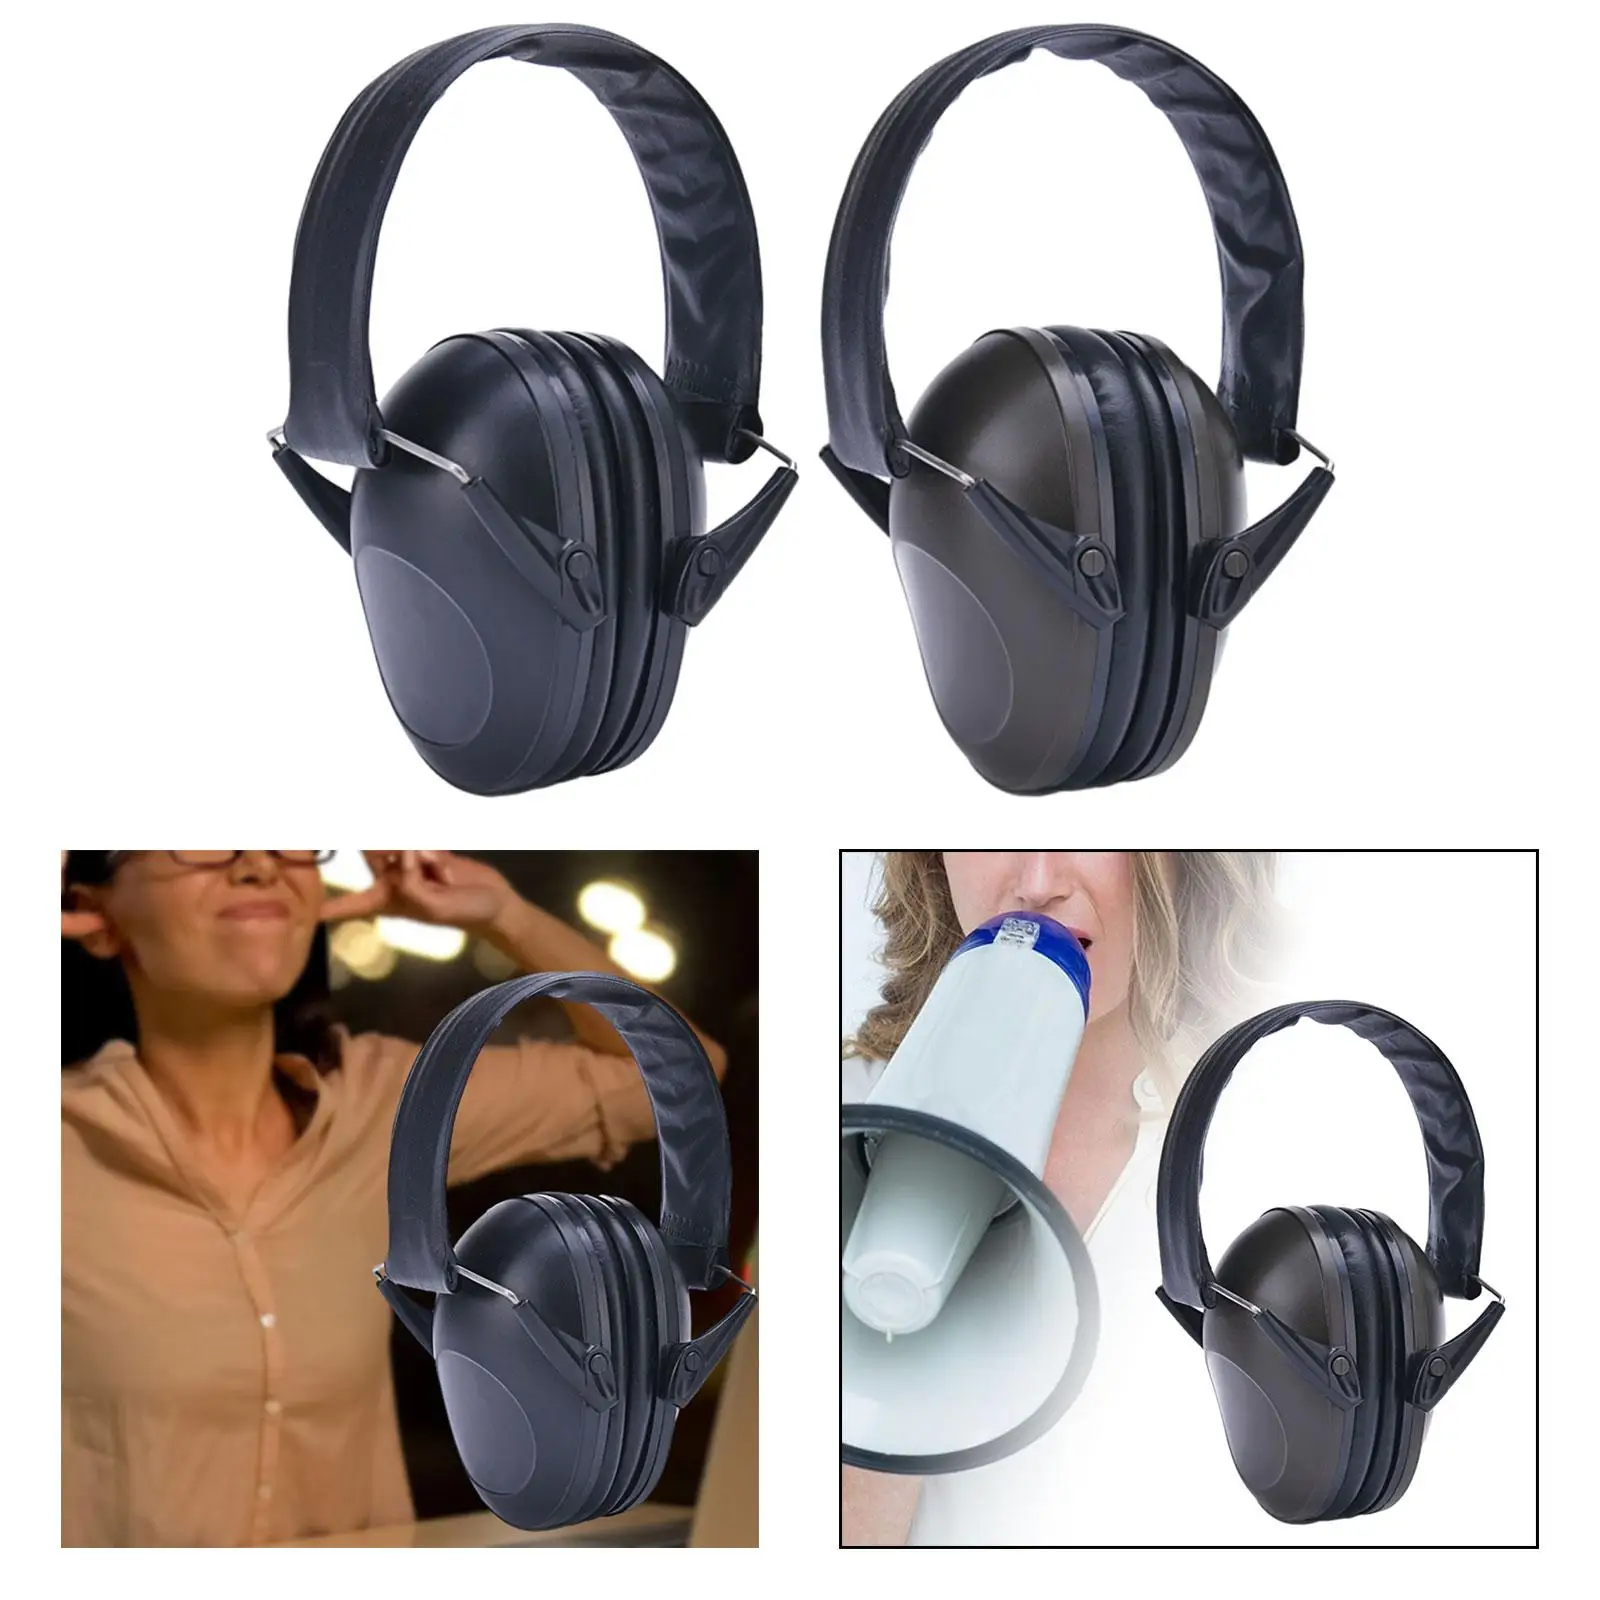 Protective Earmuffs Noise Reducing Soft Hearing Protectors Ear Protector for Office Studying Lawn Mowing Concerts Manufacturing